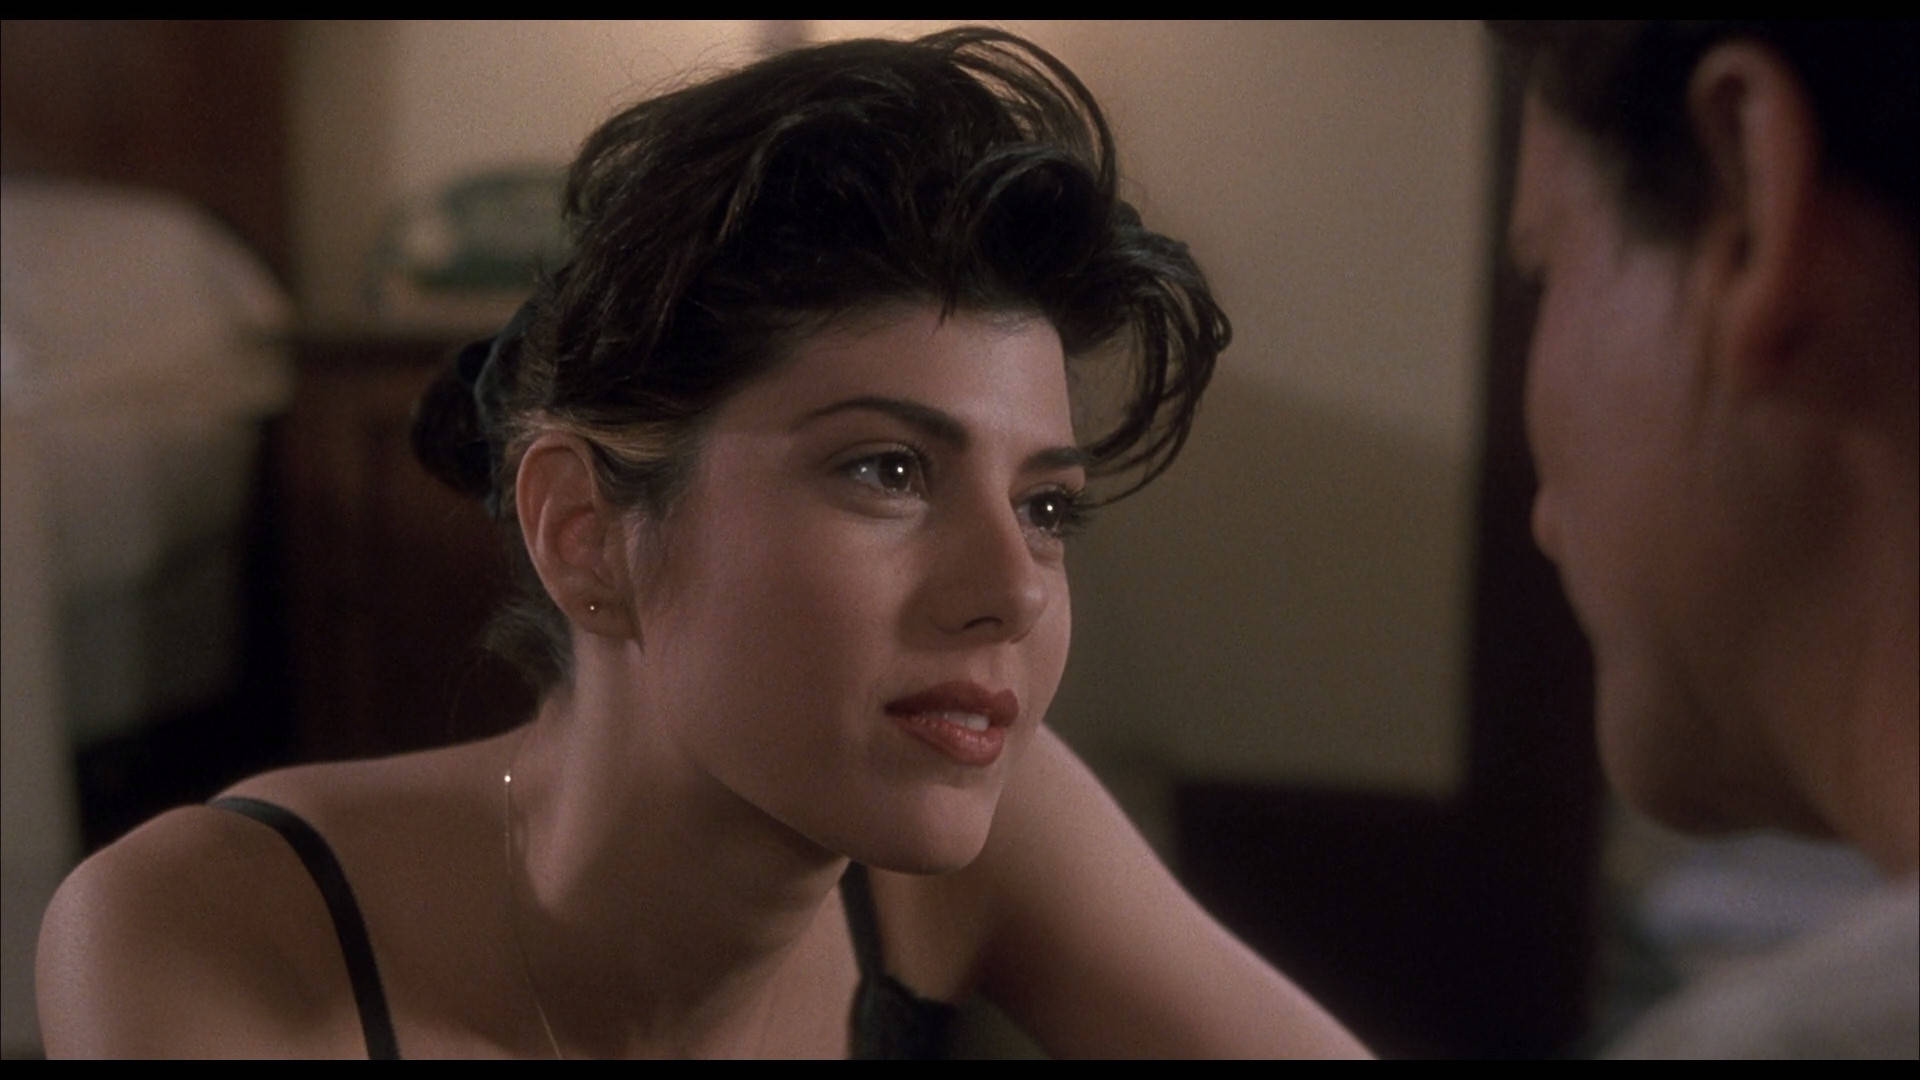 Caption: Marisa Tomei posing artistically, flaunting her stunning undercut hairstyle. Wallpaper